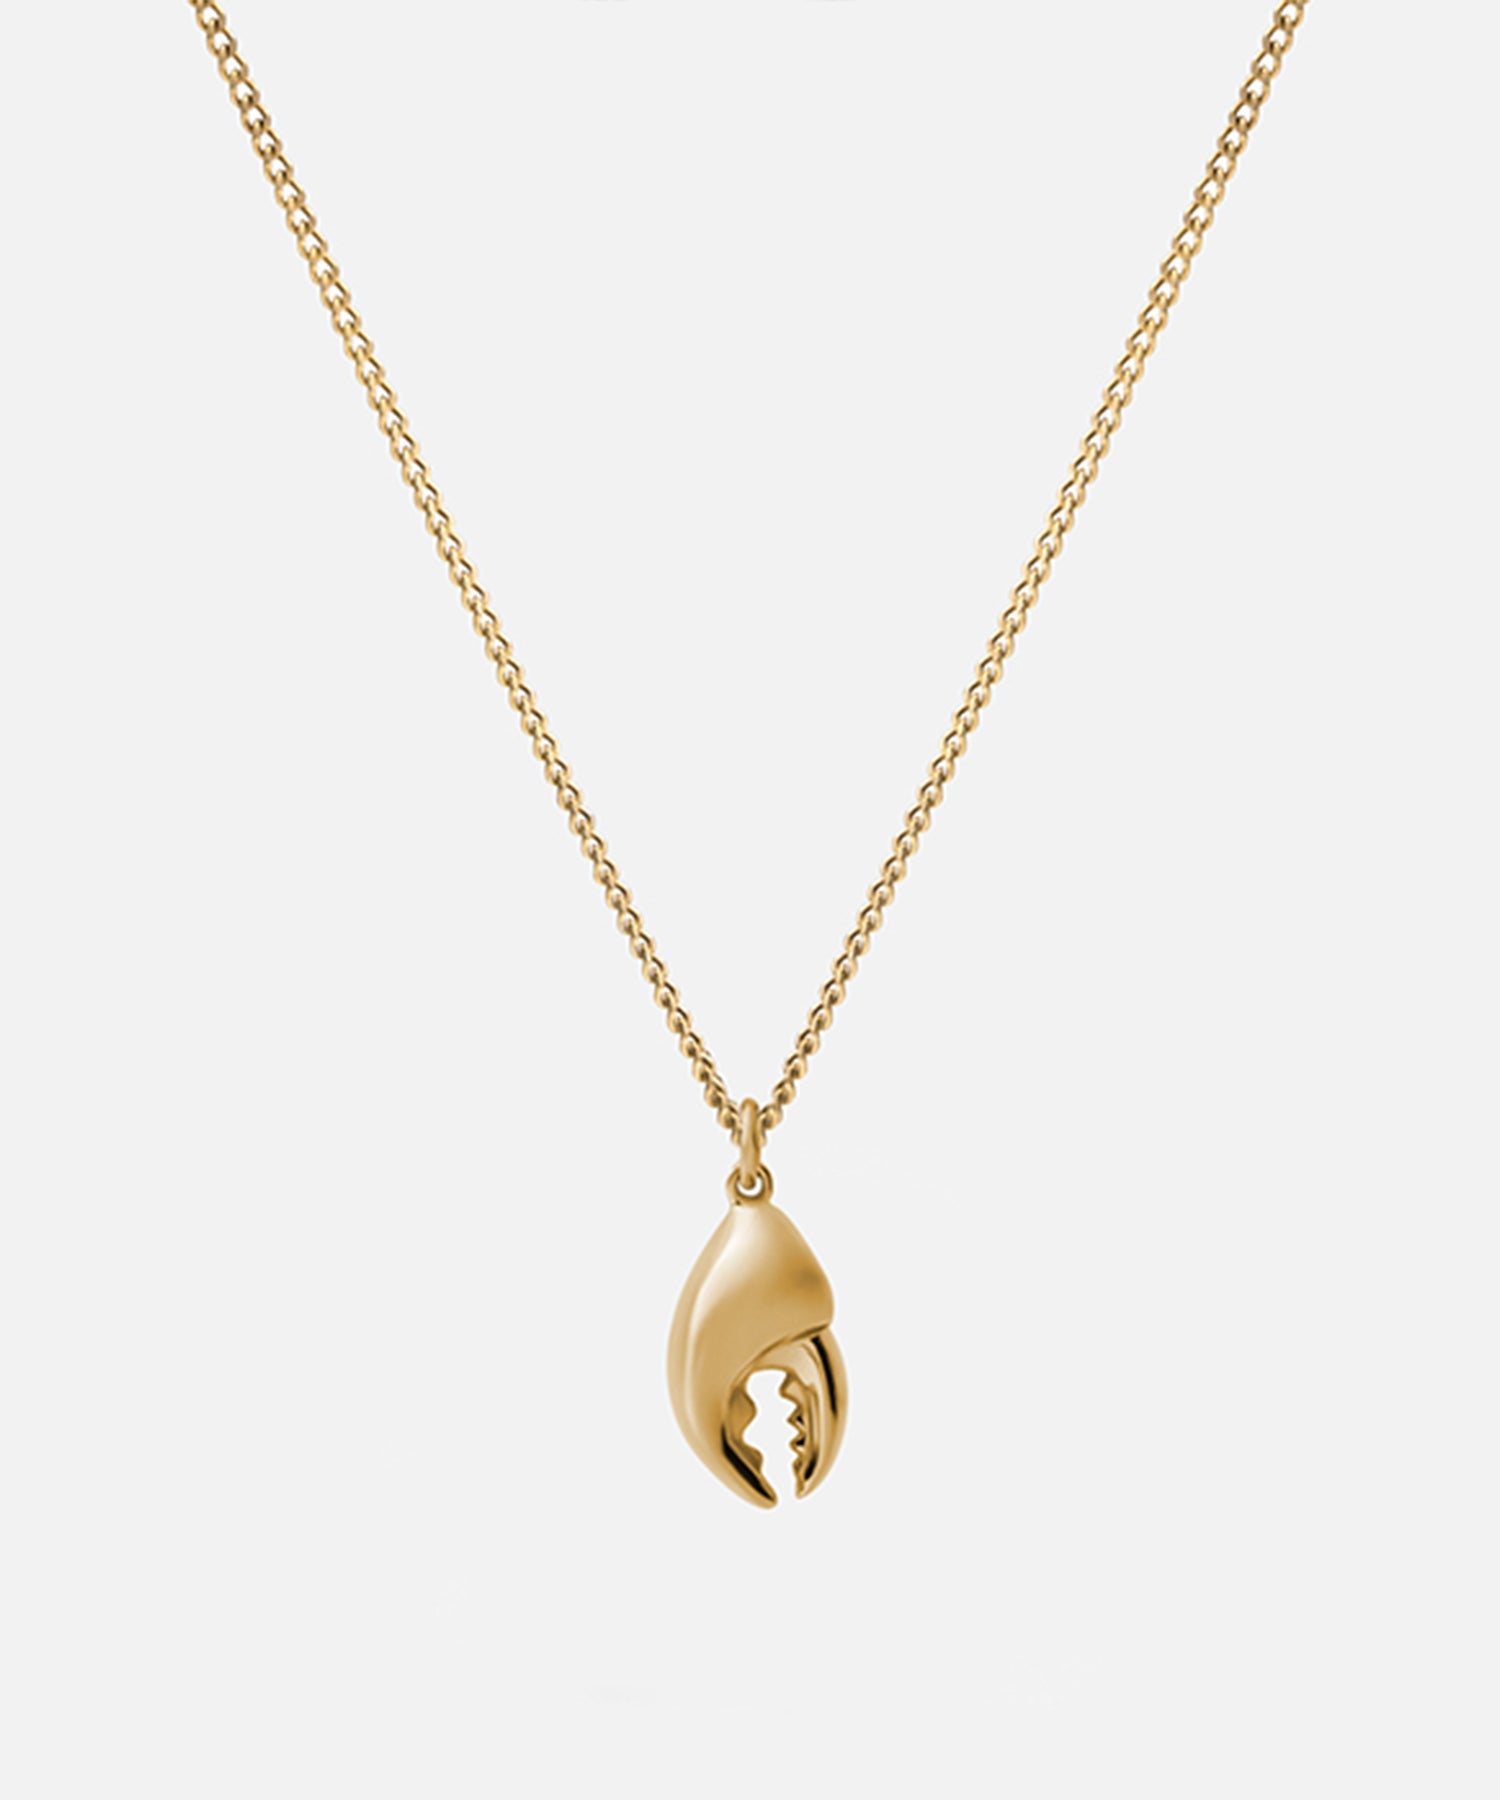 Miansai Lobster Claw Pendant Necklace in Gold